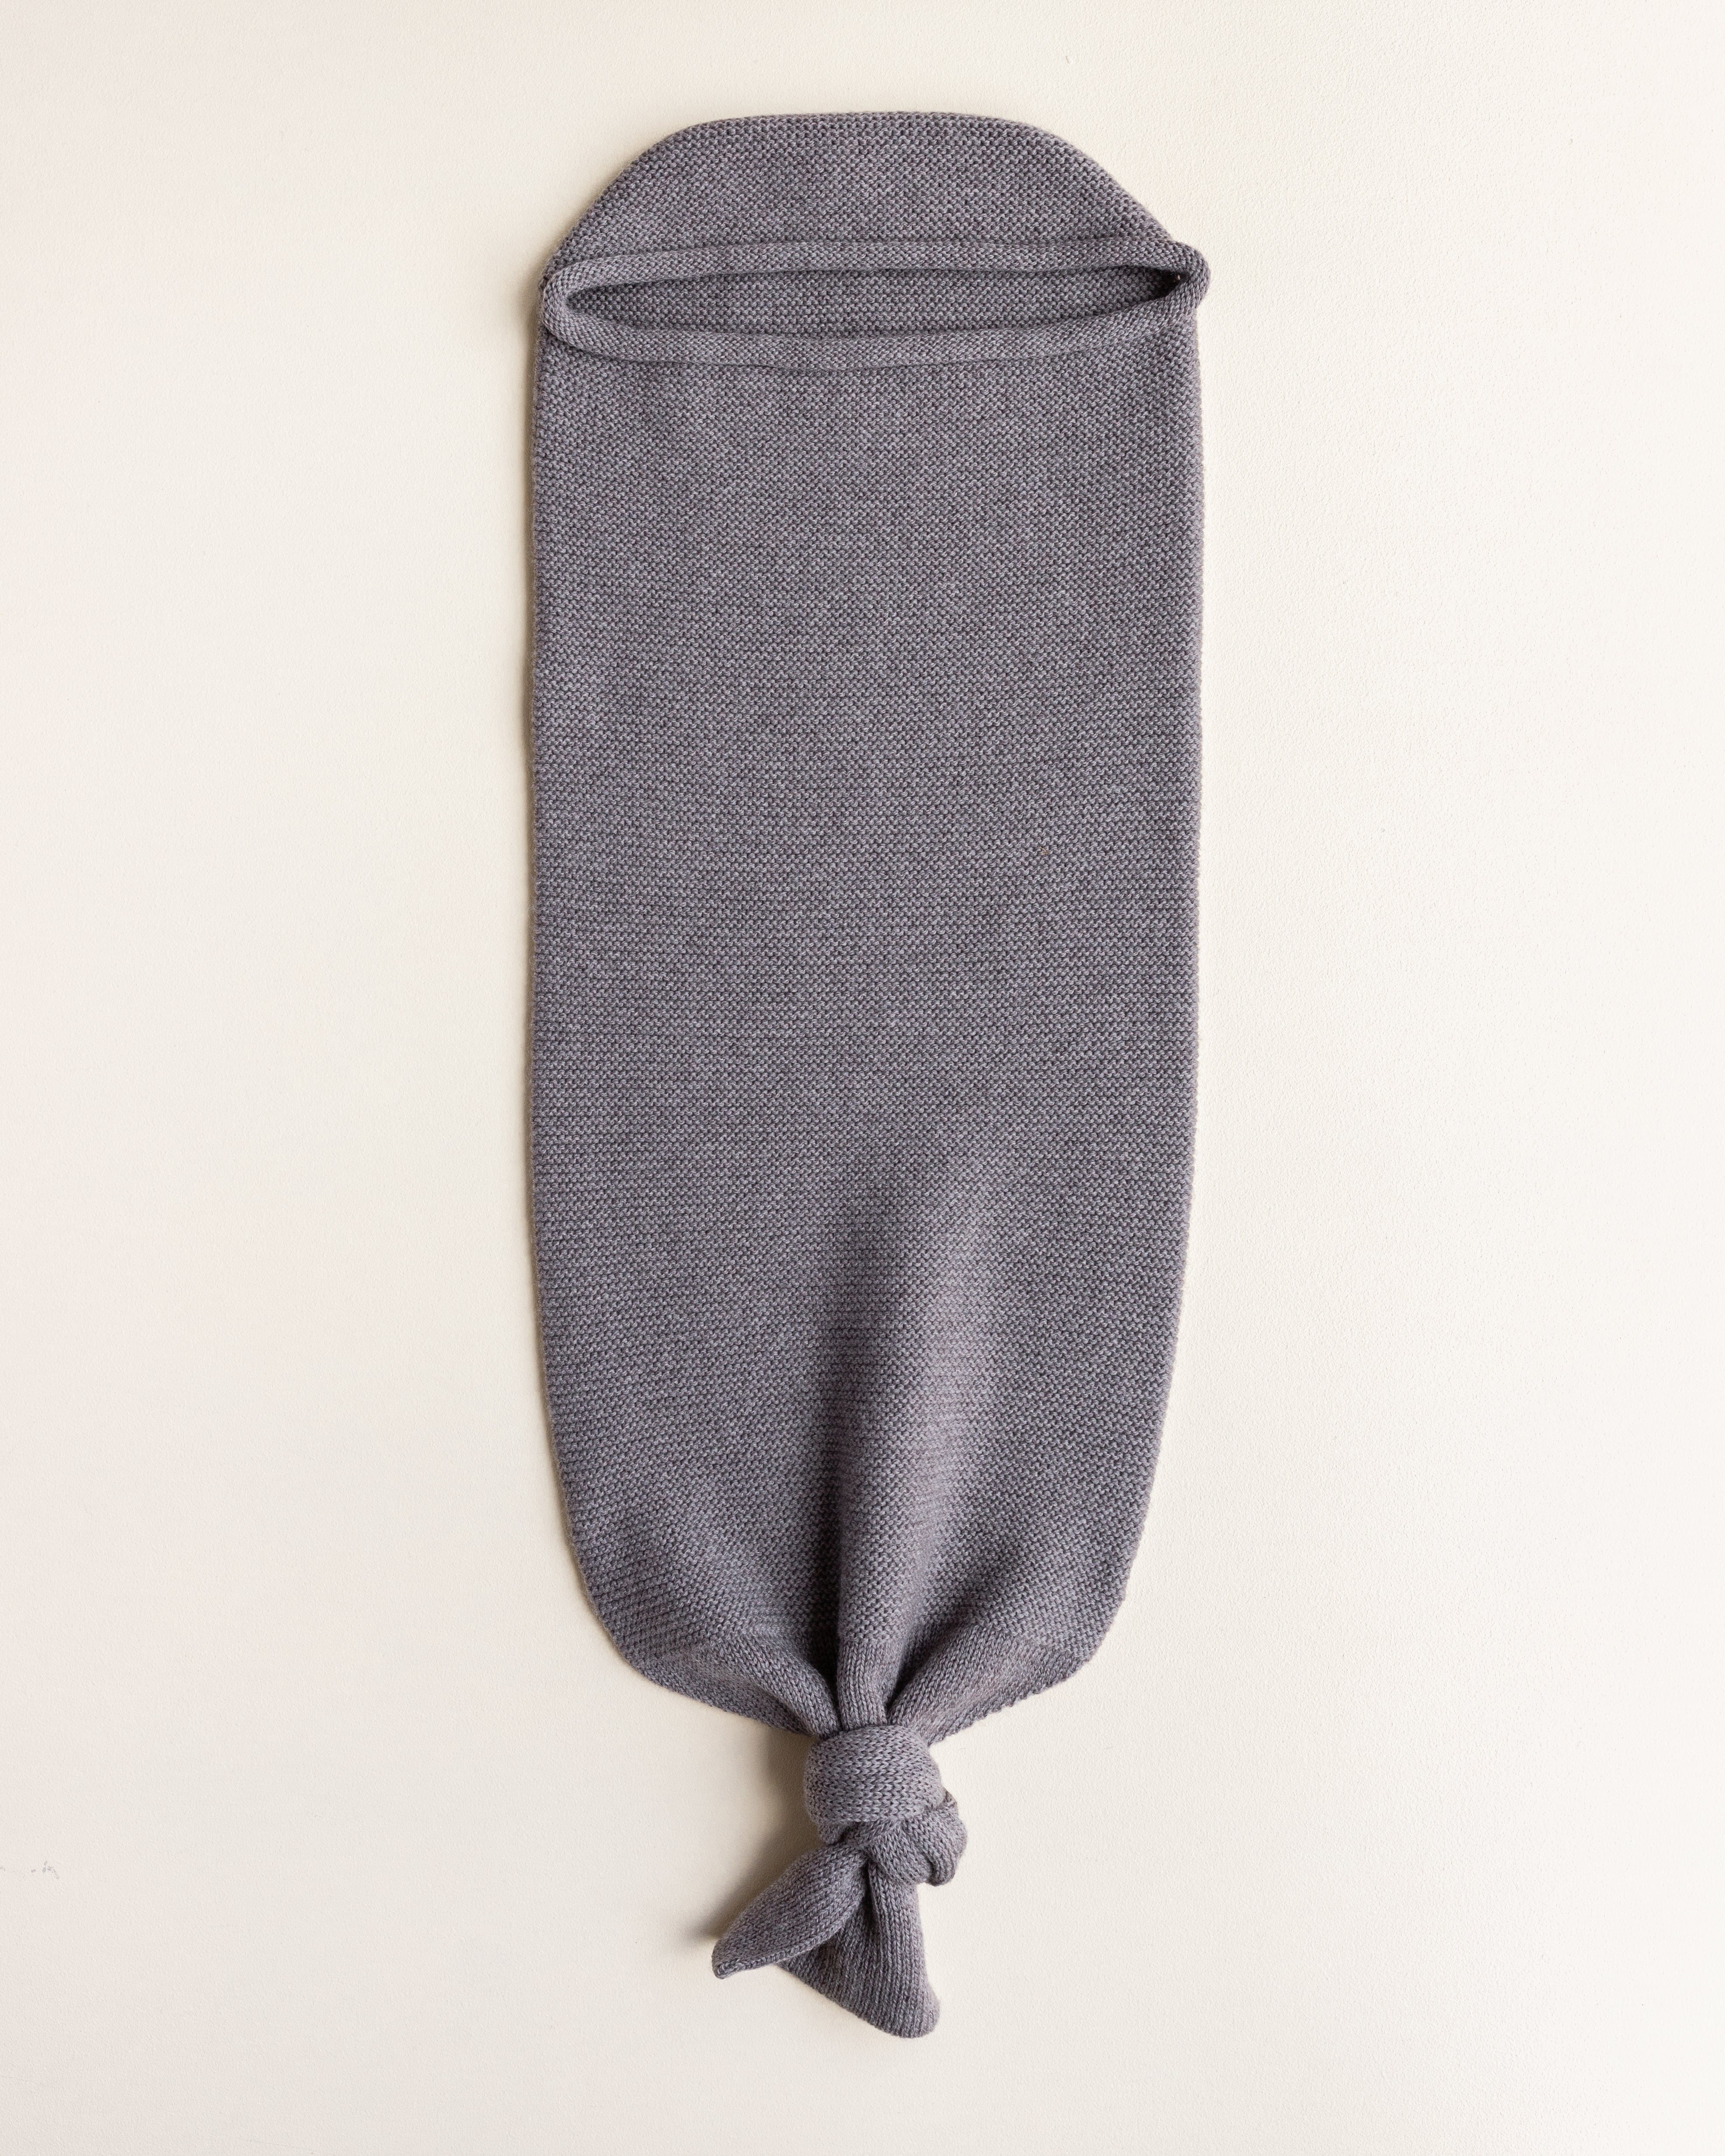 Baby Cocoon pucksack for autumn winter, gray-brown cotton